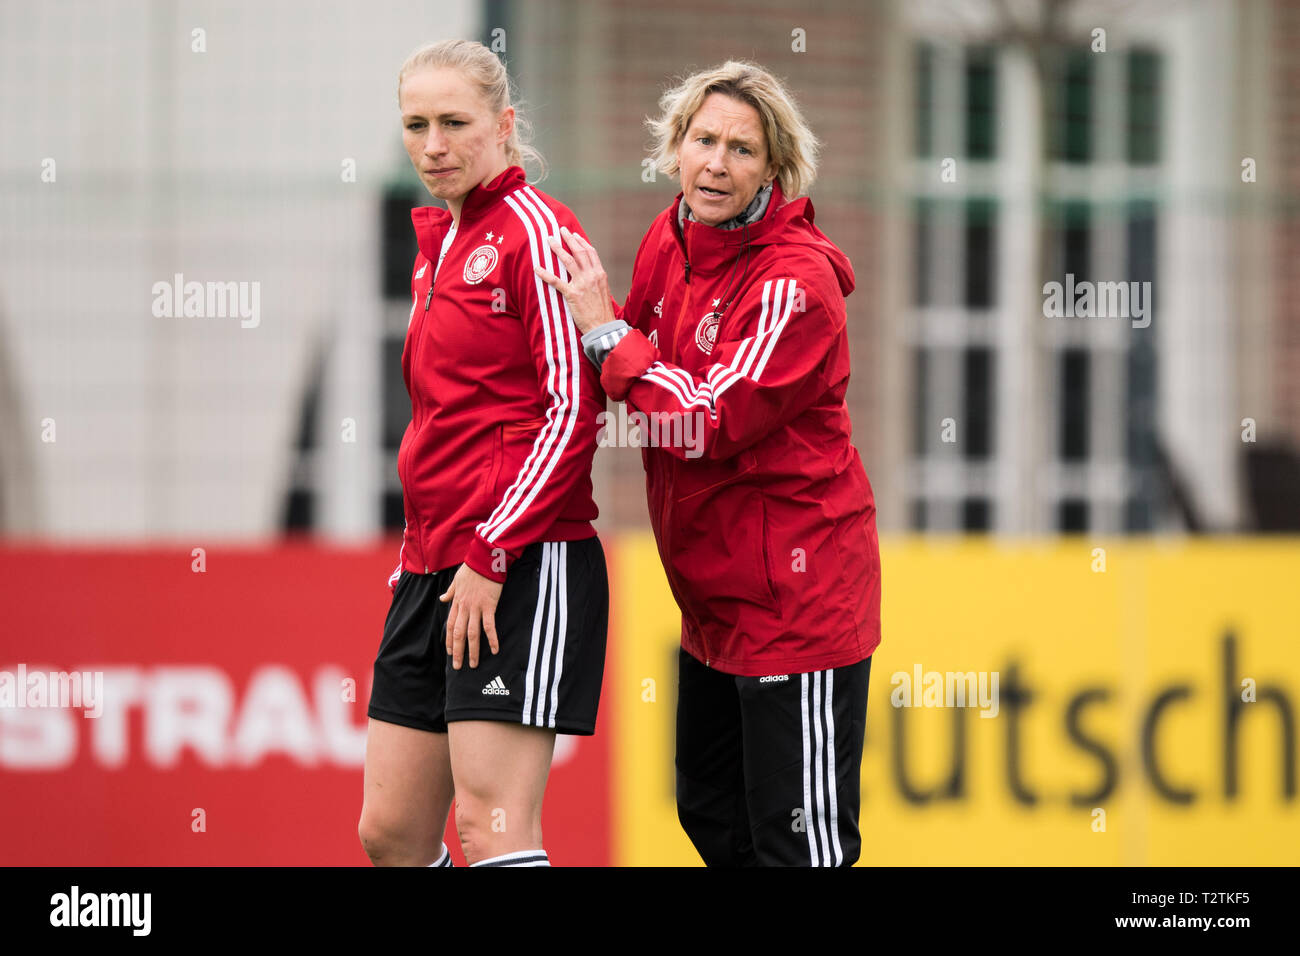 Martina VOSS-TECKLENBURG (r., Coach, coachin, coach, GER) gives besides Pauline BREMER (GER) gives instruction, instructions, half figure, half figure, photo event of the football women national team Germany (GER), on 03.04.2019 in Marienfeld/Germany. ¬ | usage worldwide Stock Photo